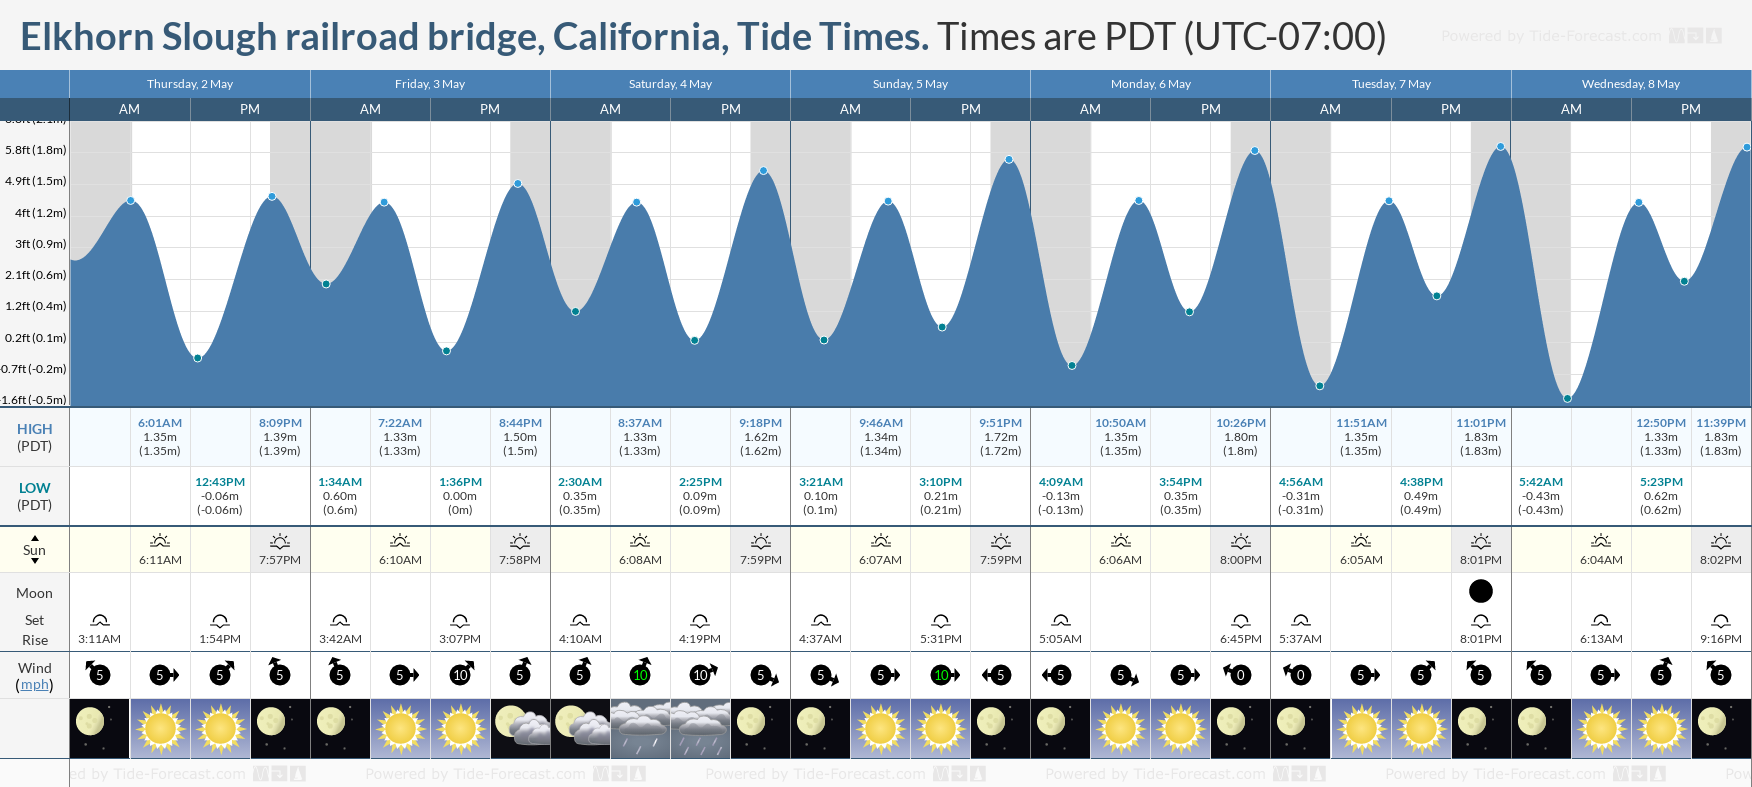 Elkhorn Slough railroad bridge, California Tide Chart including high and low tide tide times for the next 7 days